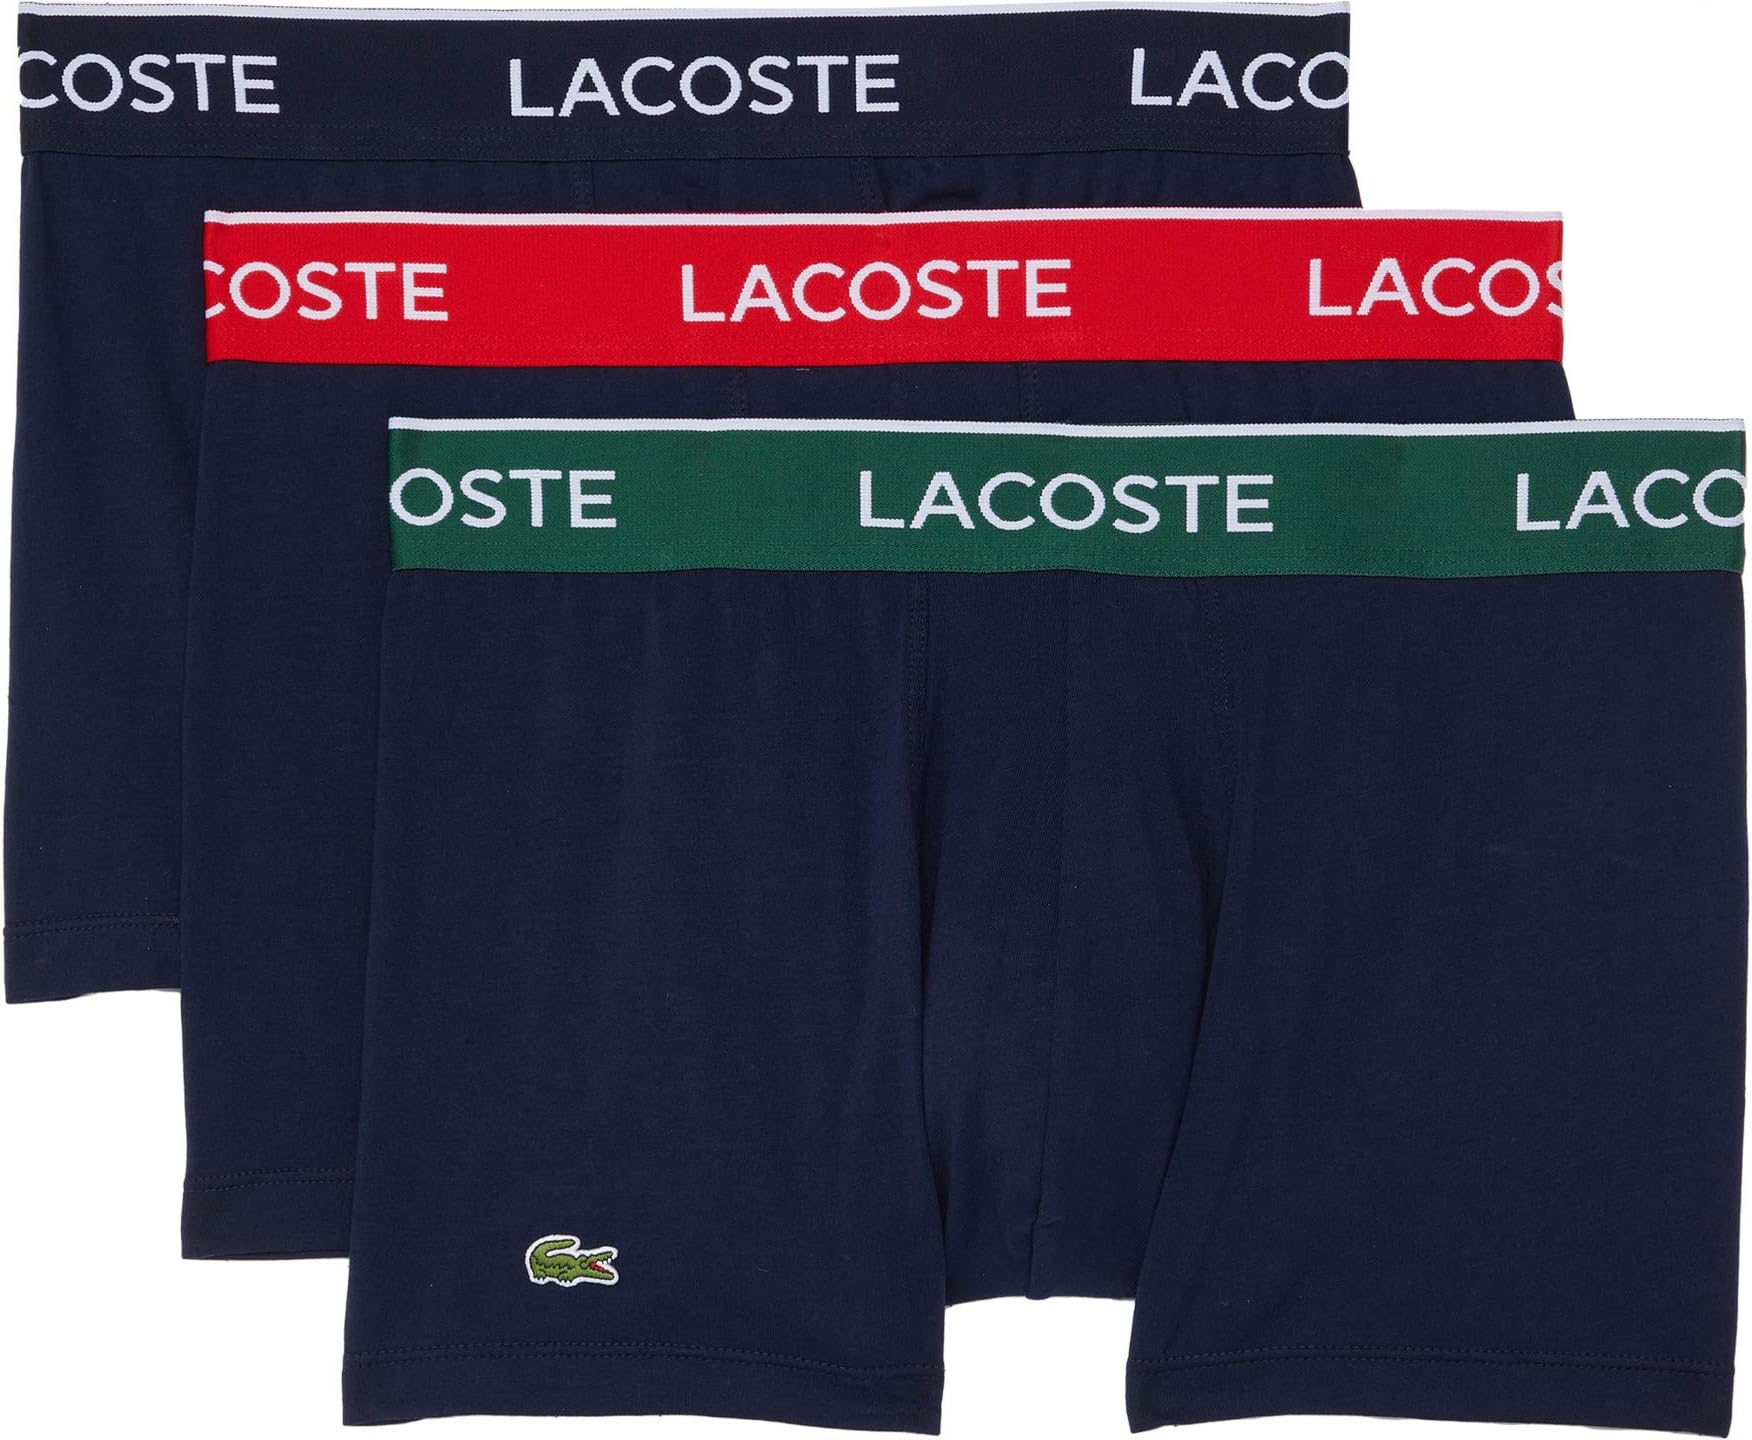 Трусы Trunks 3-Pack Casual Classic Colorful Waistband Lacoste, цвет Navy Blue/Green/Red/Navy Blue серьги blue red